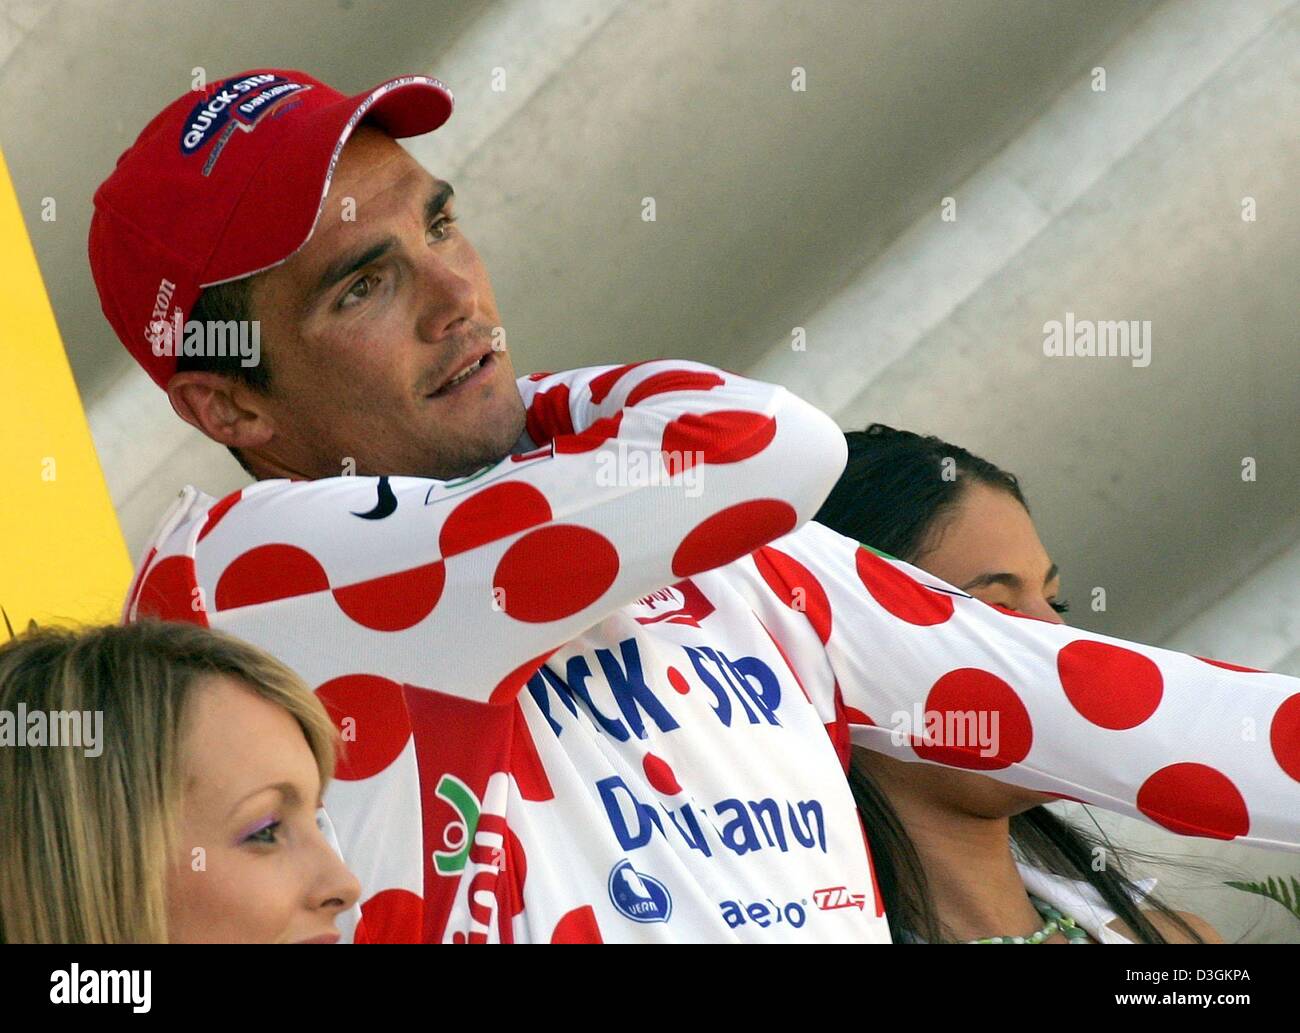 (dpa) - French cyclist Richard Virenque of team Quick Step-Davitamon puts on the best climber's white and red polka-dotted jersey after the tenth stage of the Tour de France cycling race in Saint-Flour, France, 14 July 2004. The 237km long first mountain stage took the cyclists from Limoges through the Massif Central to Saint-Flour. Virenque also won the stage. Stock Photo